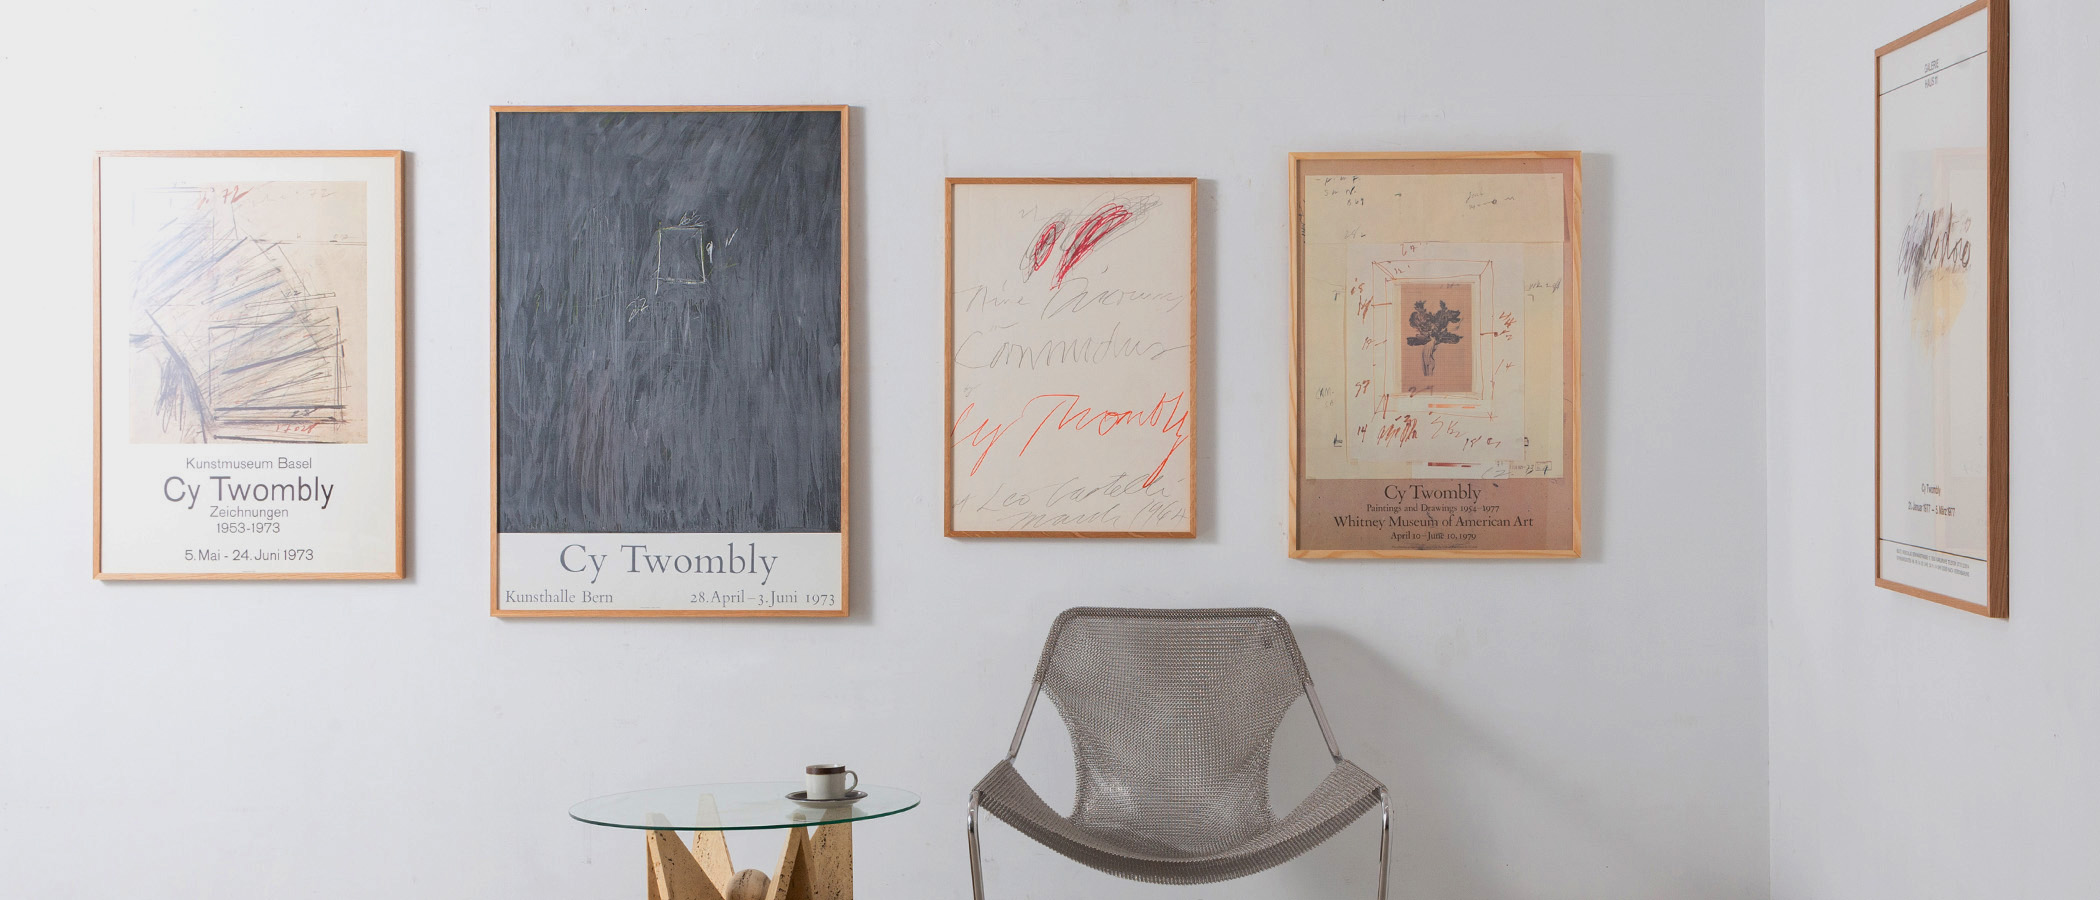 CY TWOMBLY｜VINTAGE POSTER